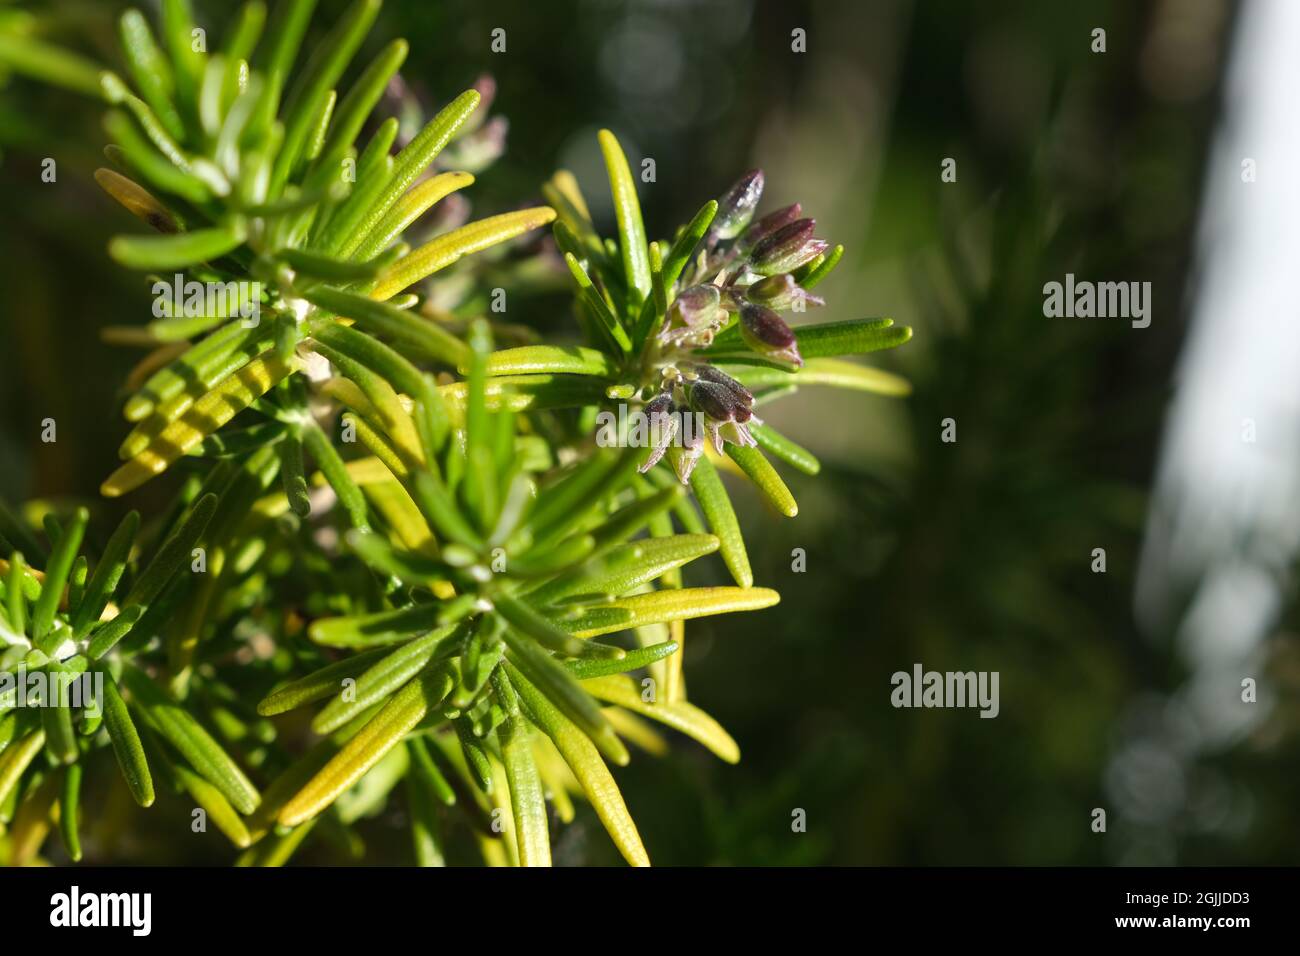 Rosemary (Salvia rosmarinus) is a shrub with fragrant, needle-like leaves and white, pink, purple, blue flowers. Sunny after the rain. Wet plant and l Stock Photo